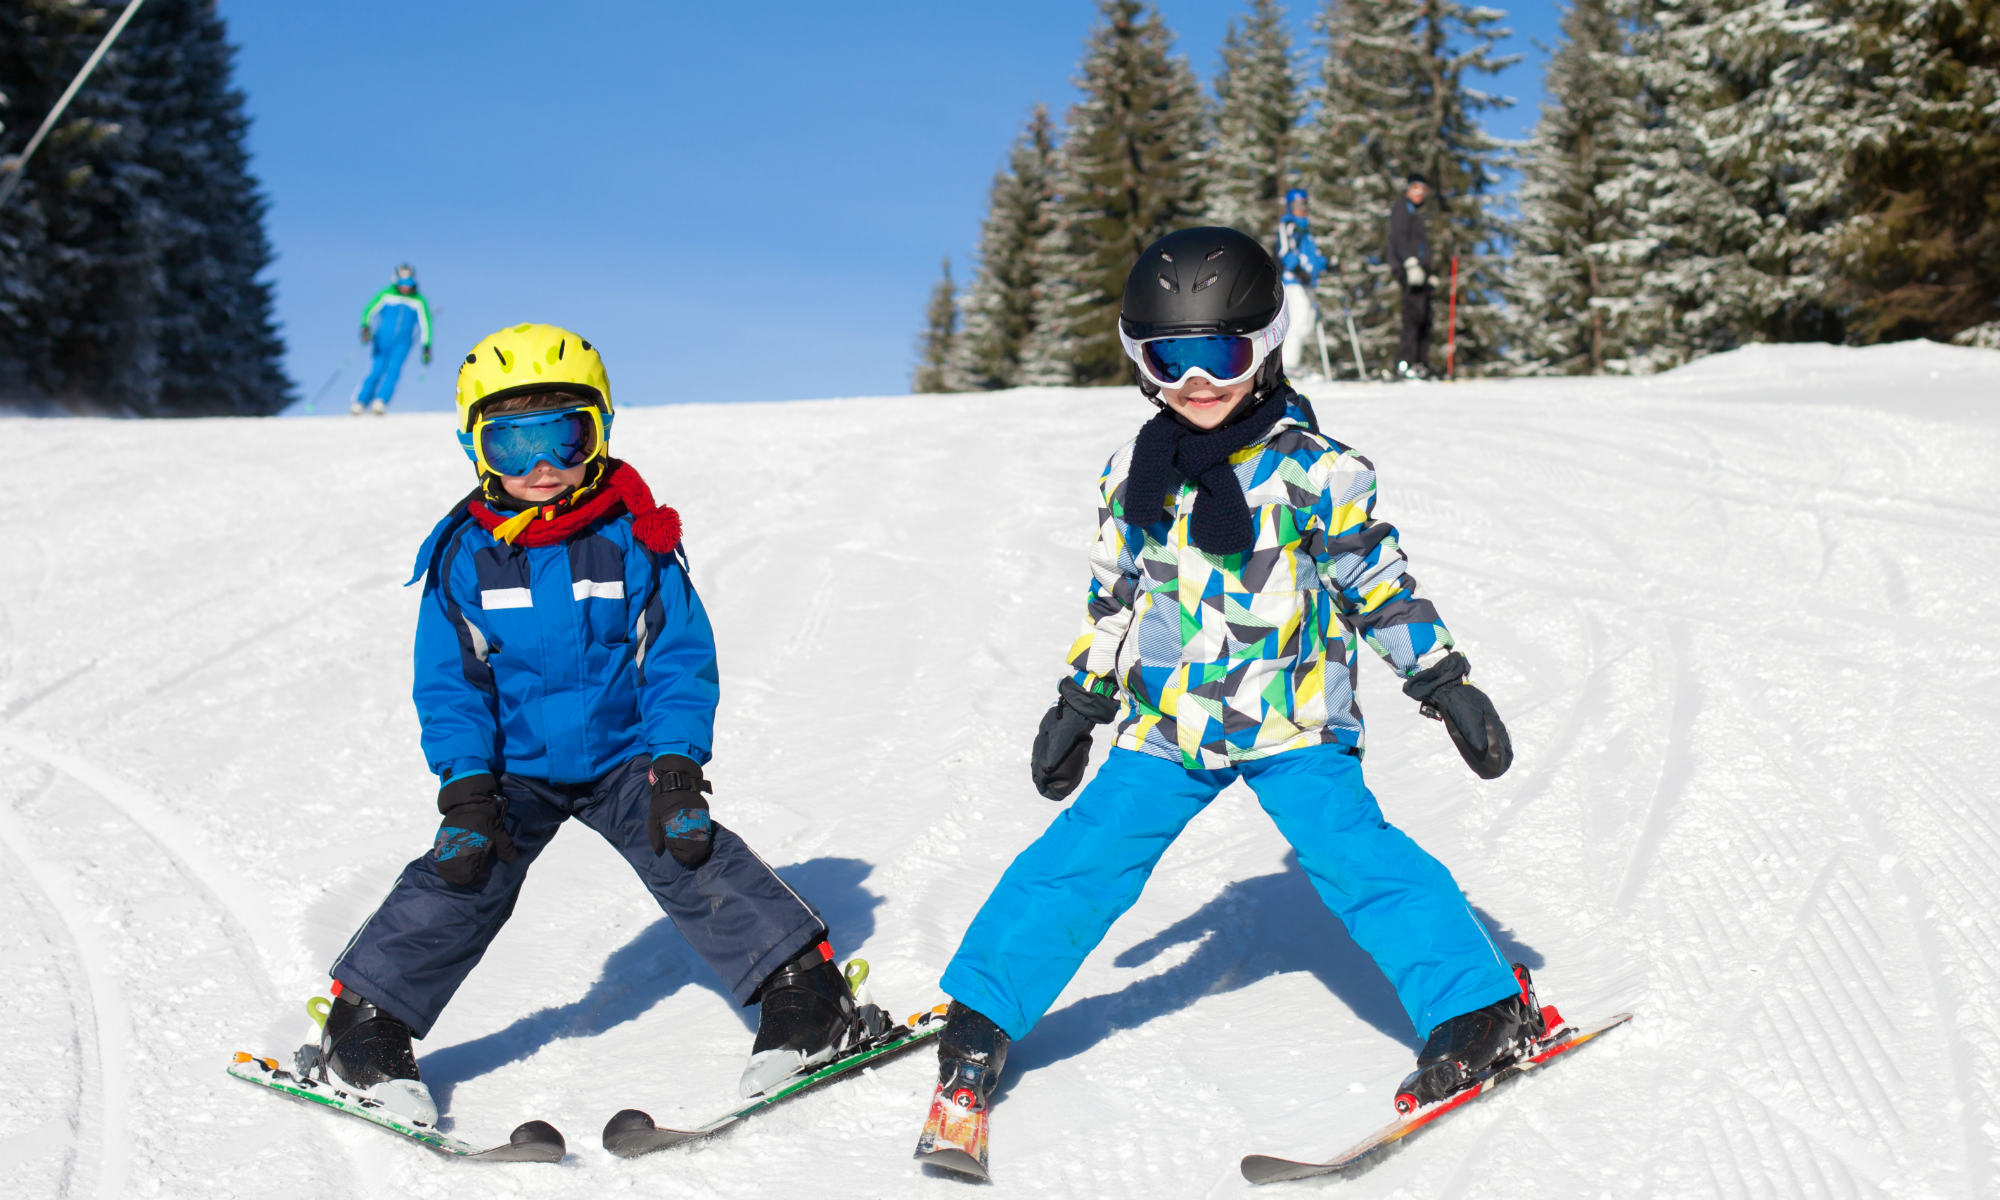 Two children skiing in plough position on a sunny ski slope.